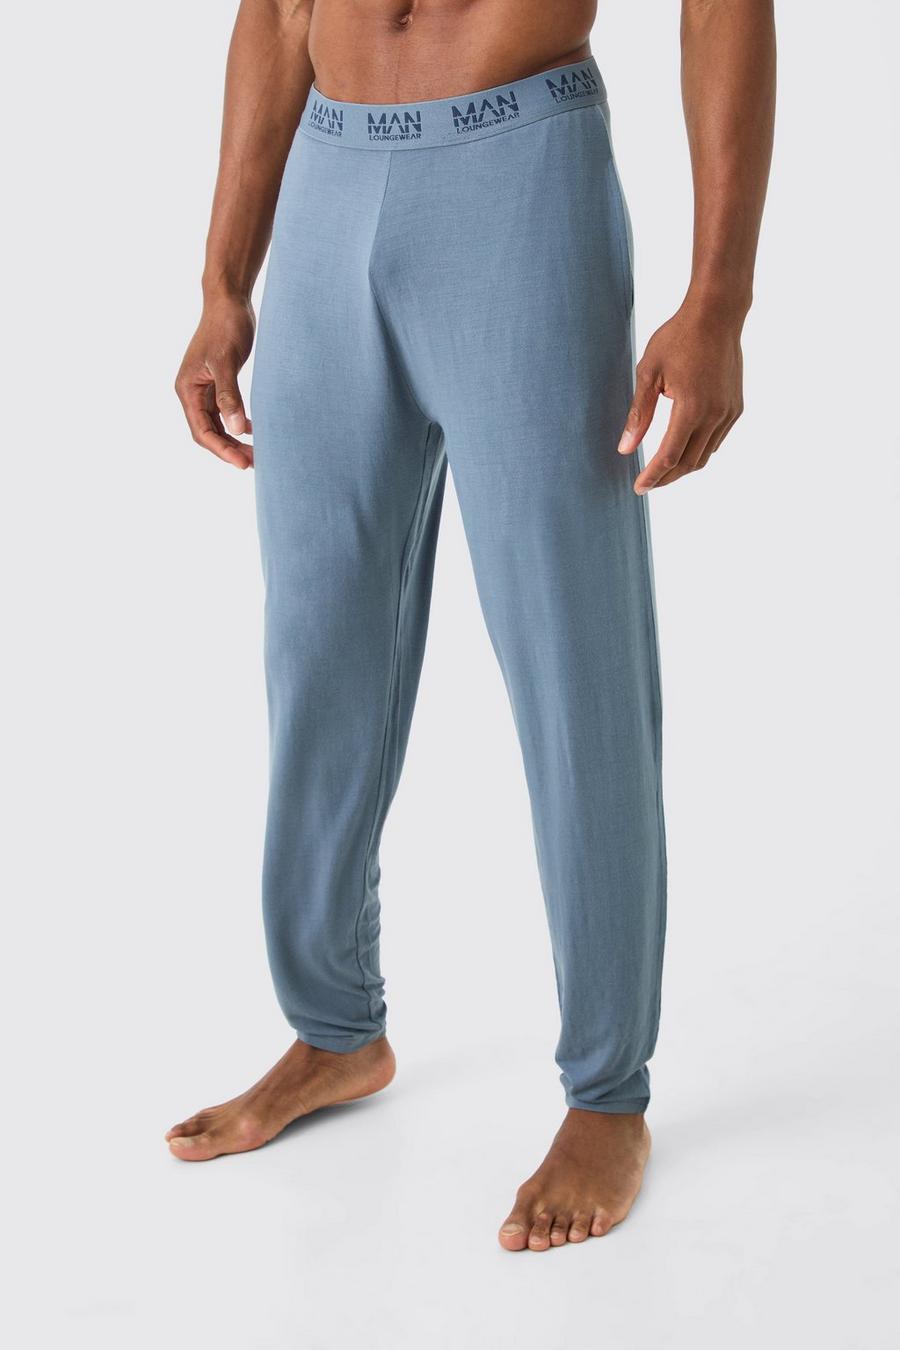 Slate blue Premium Modal Mix Relaxed Fit Lounge Bottoms